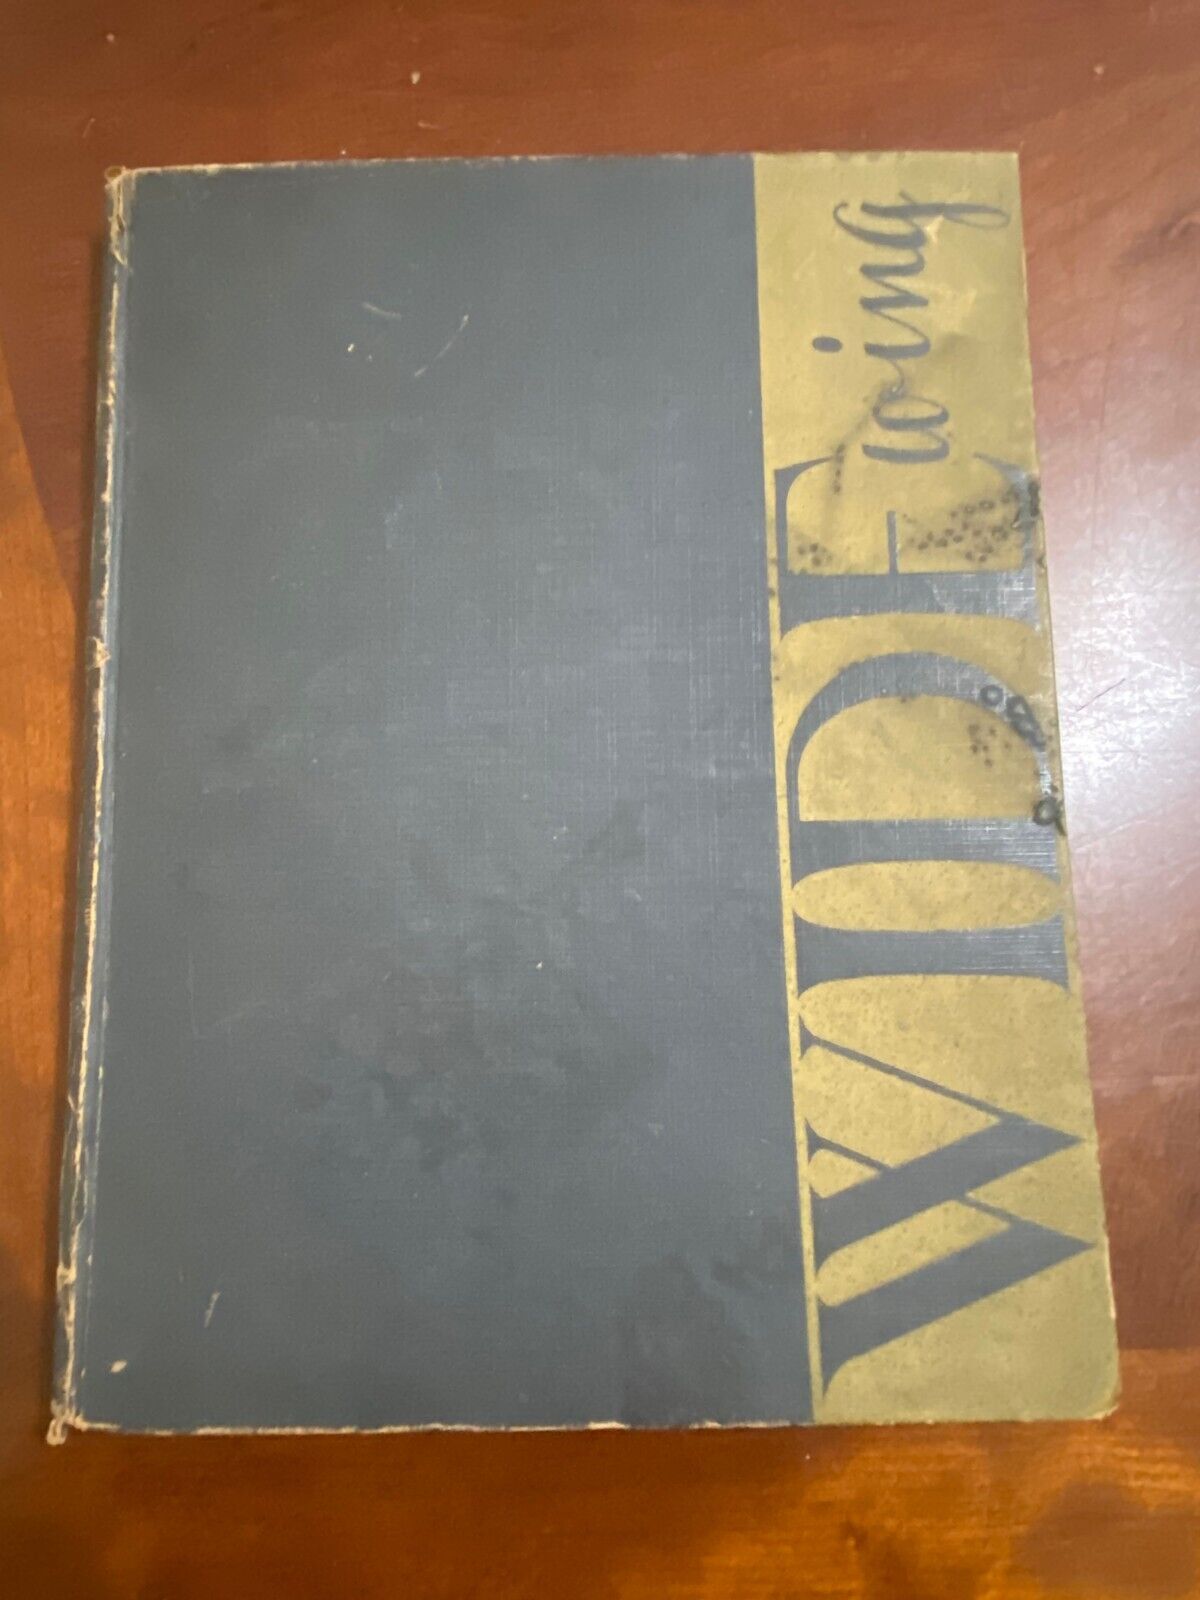 1945 Wide Wing Book, U.S. Army Air Force in Europe WWII AAF